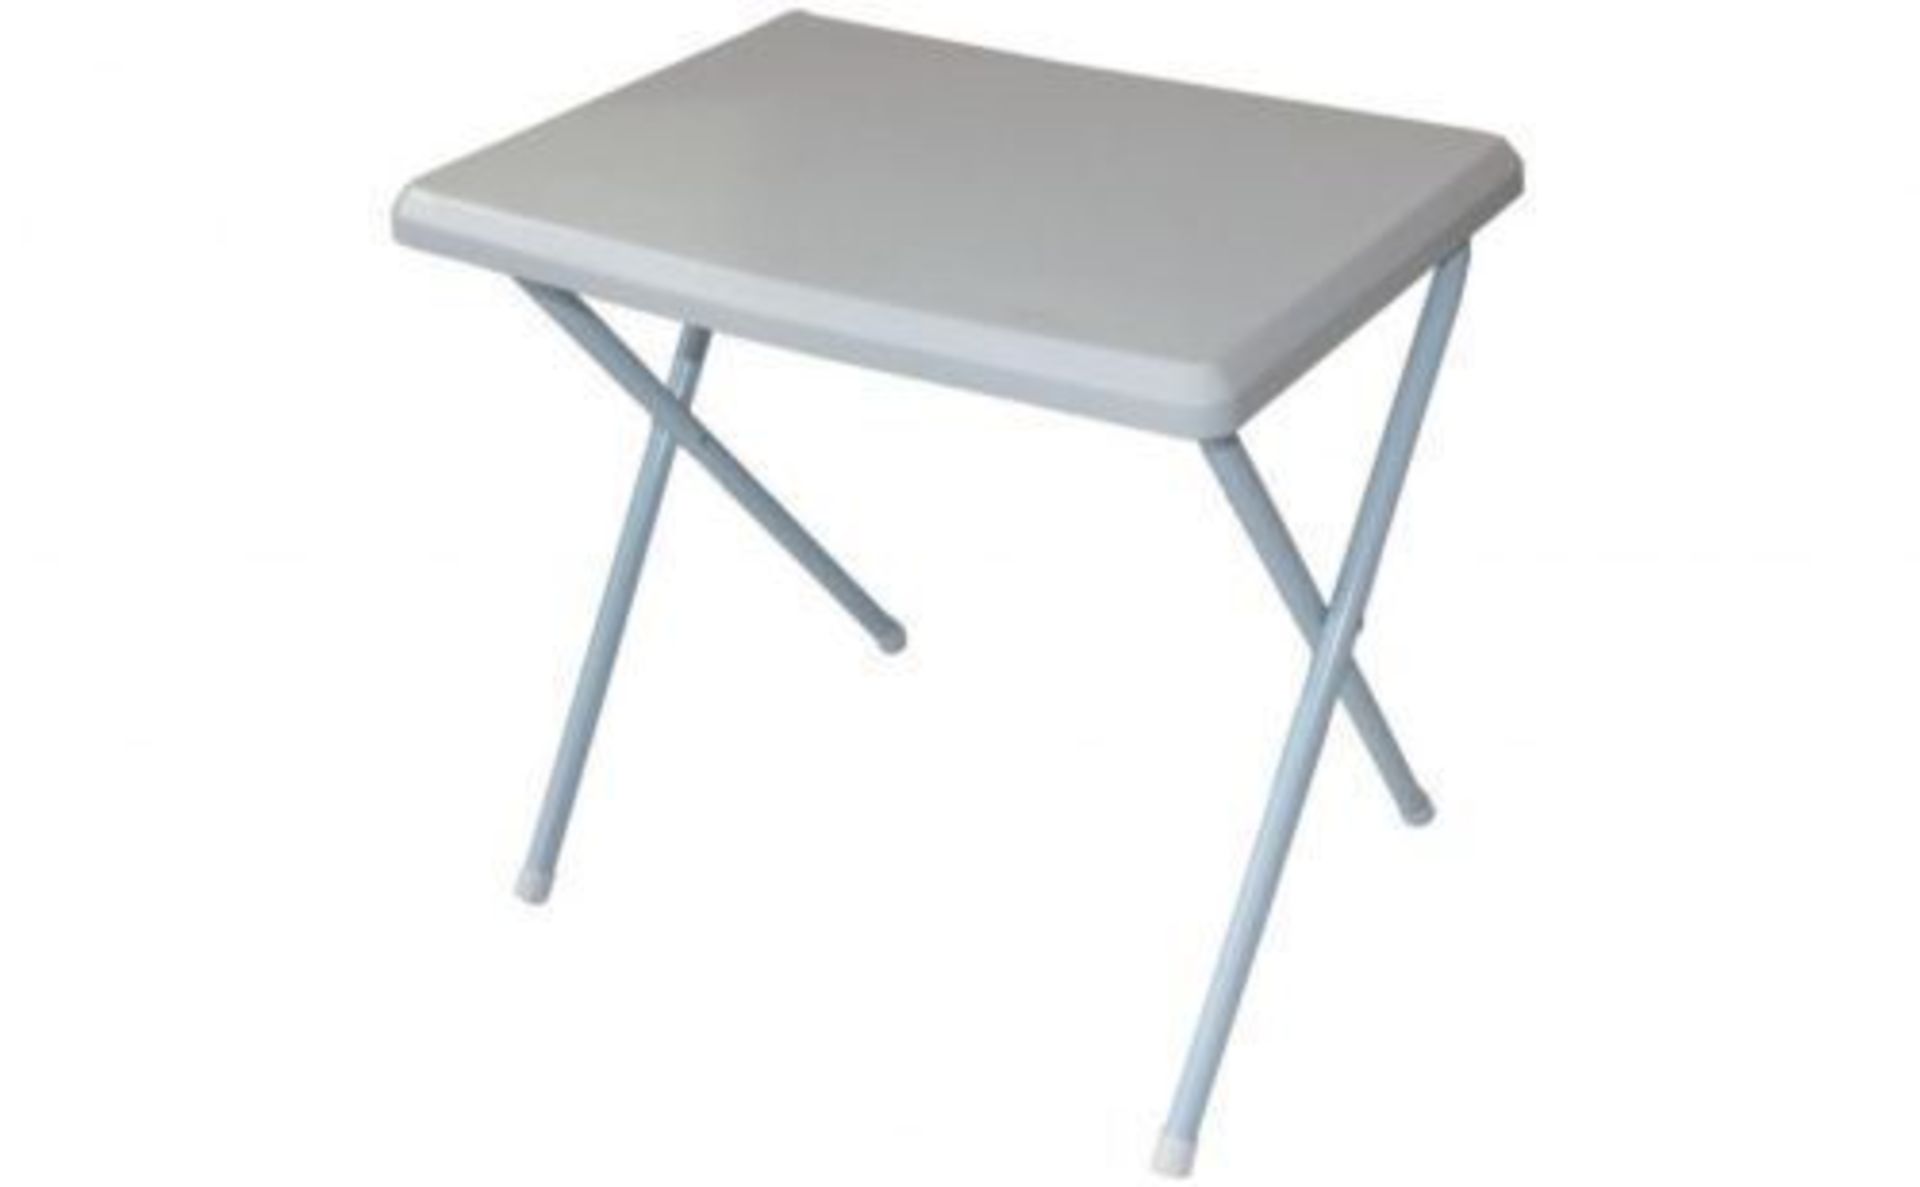 V Brand New Low Profile Folding Table X 2 YOUR BID PRICE TO BE MULTIPLIED BY TWO